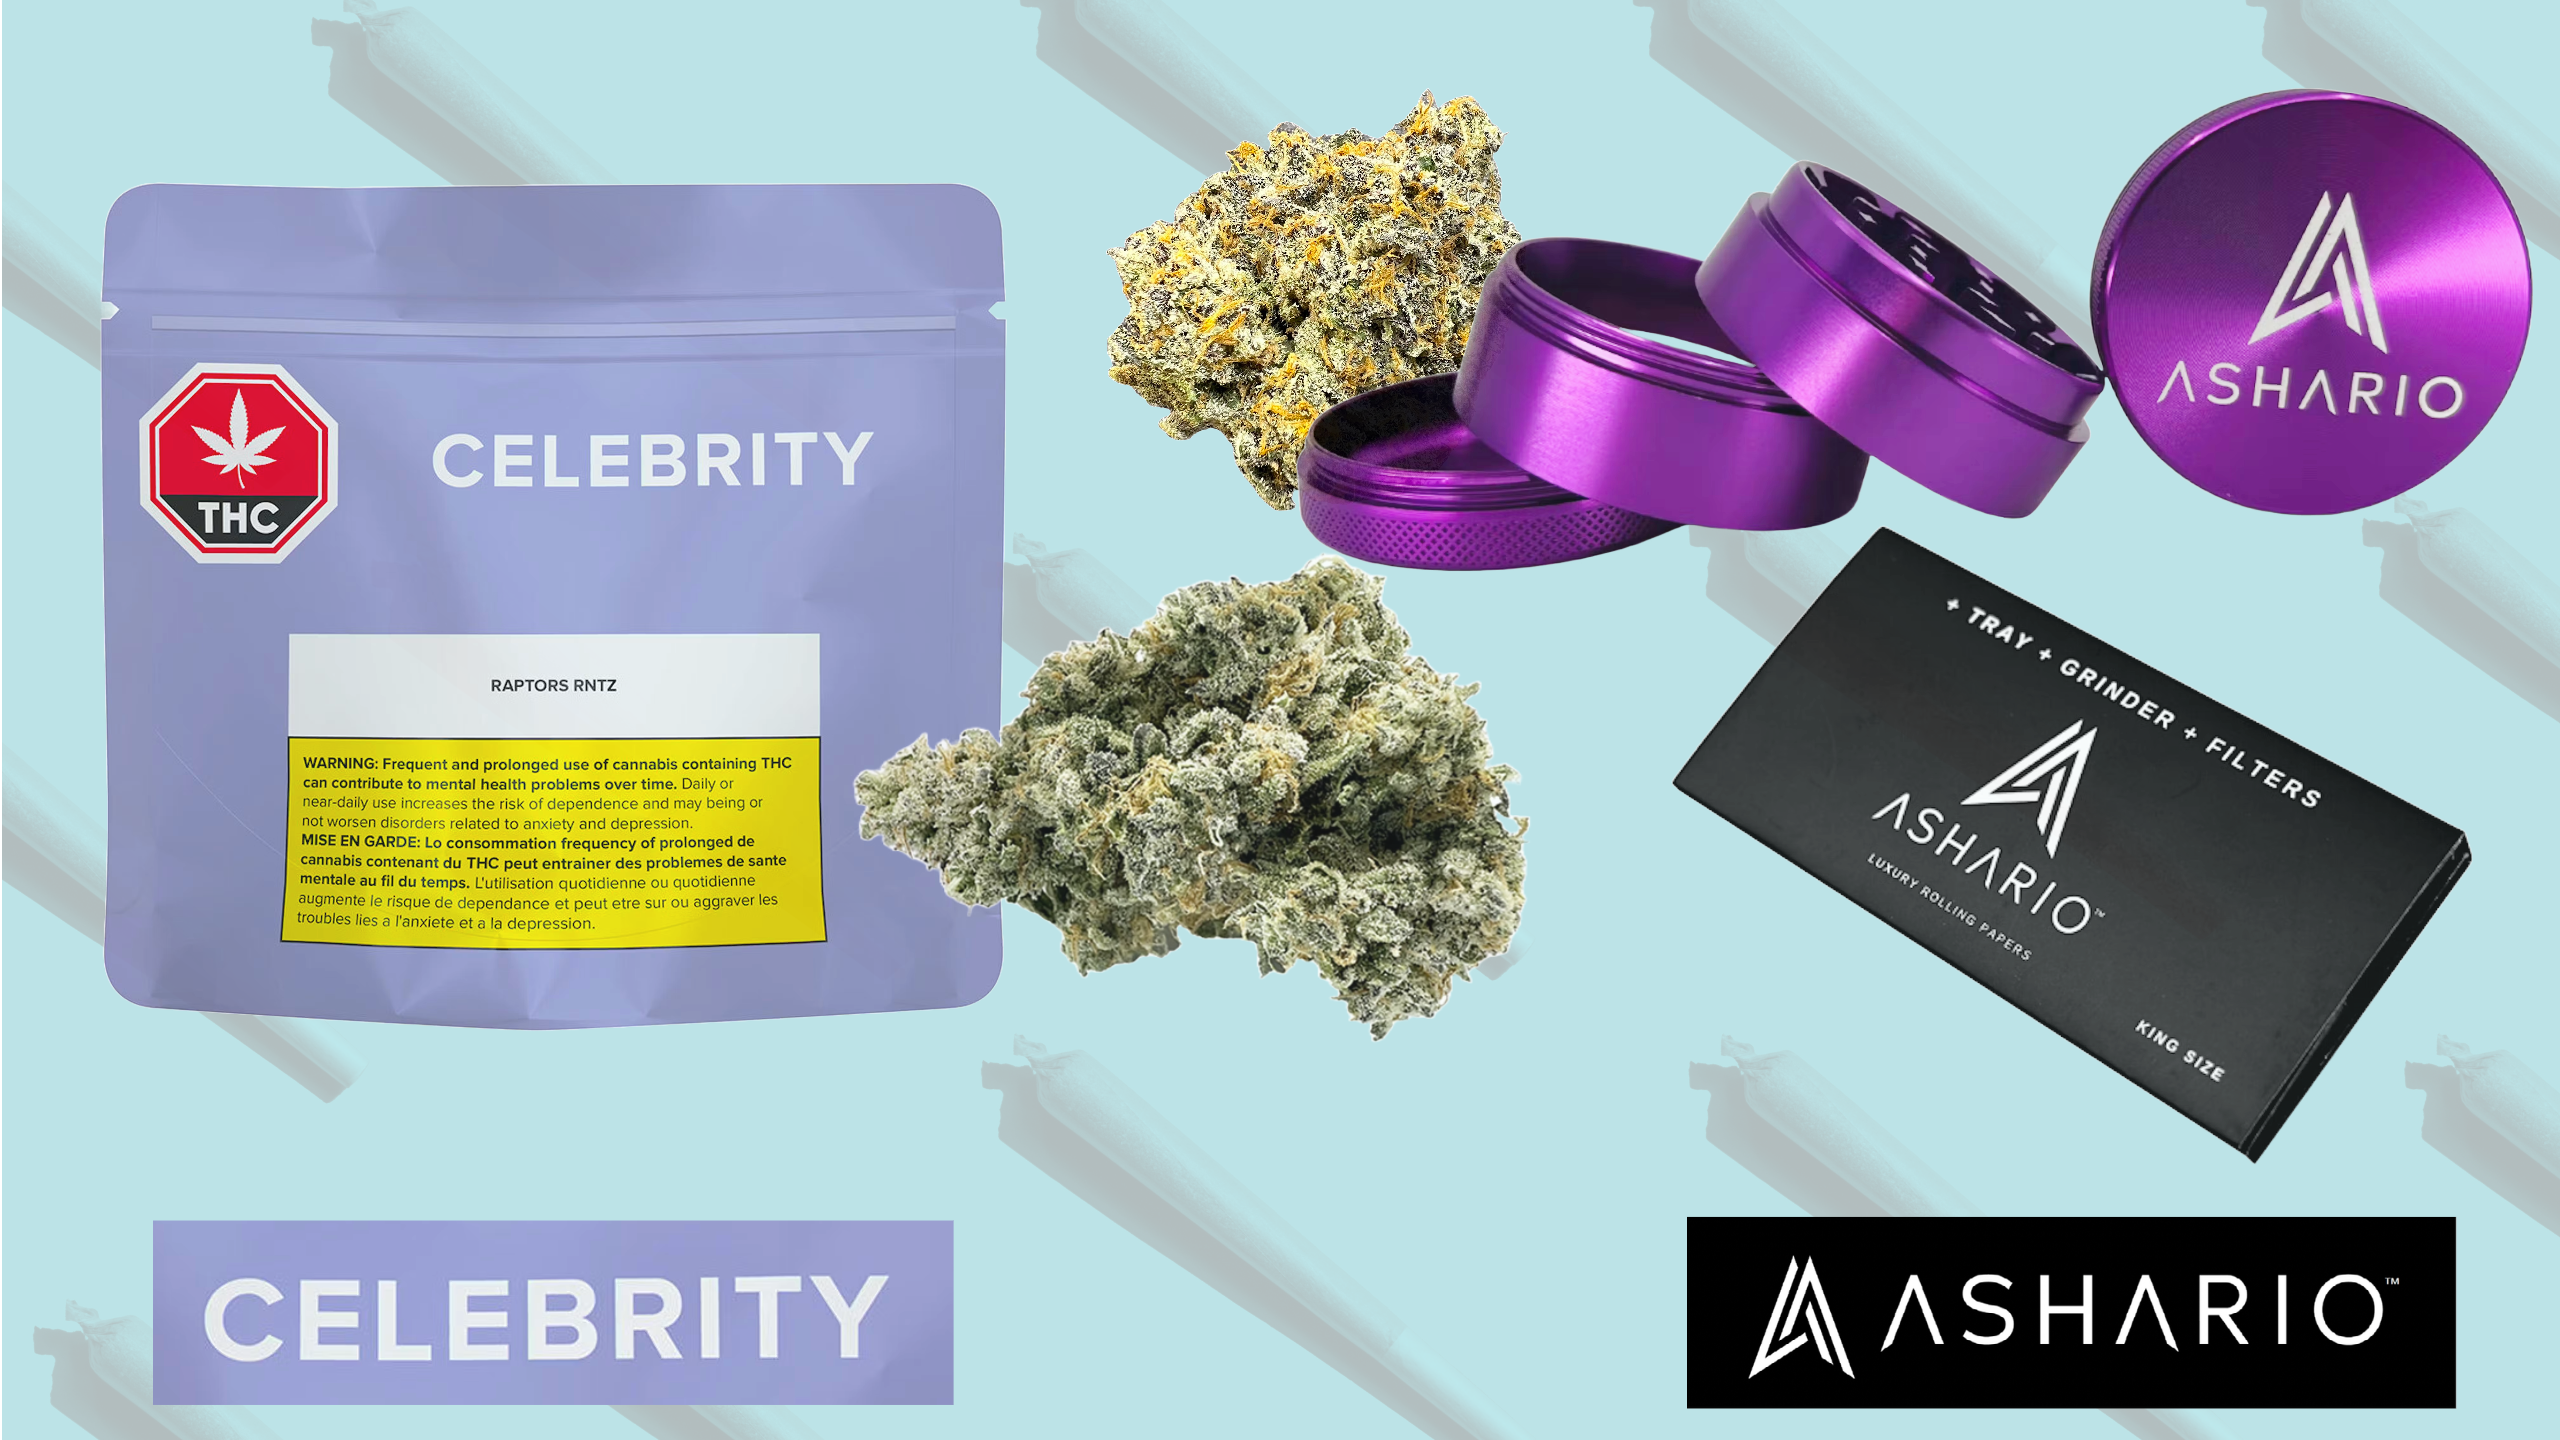 Experience the epitome of luxury and refinement with Celebrity, the ultimate destination for craft flower aficionados, now exclusively available at Ashario Cannabis. 